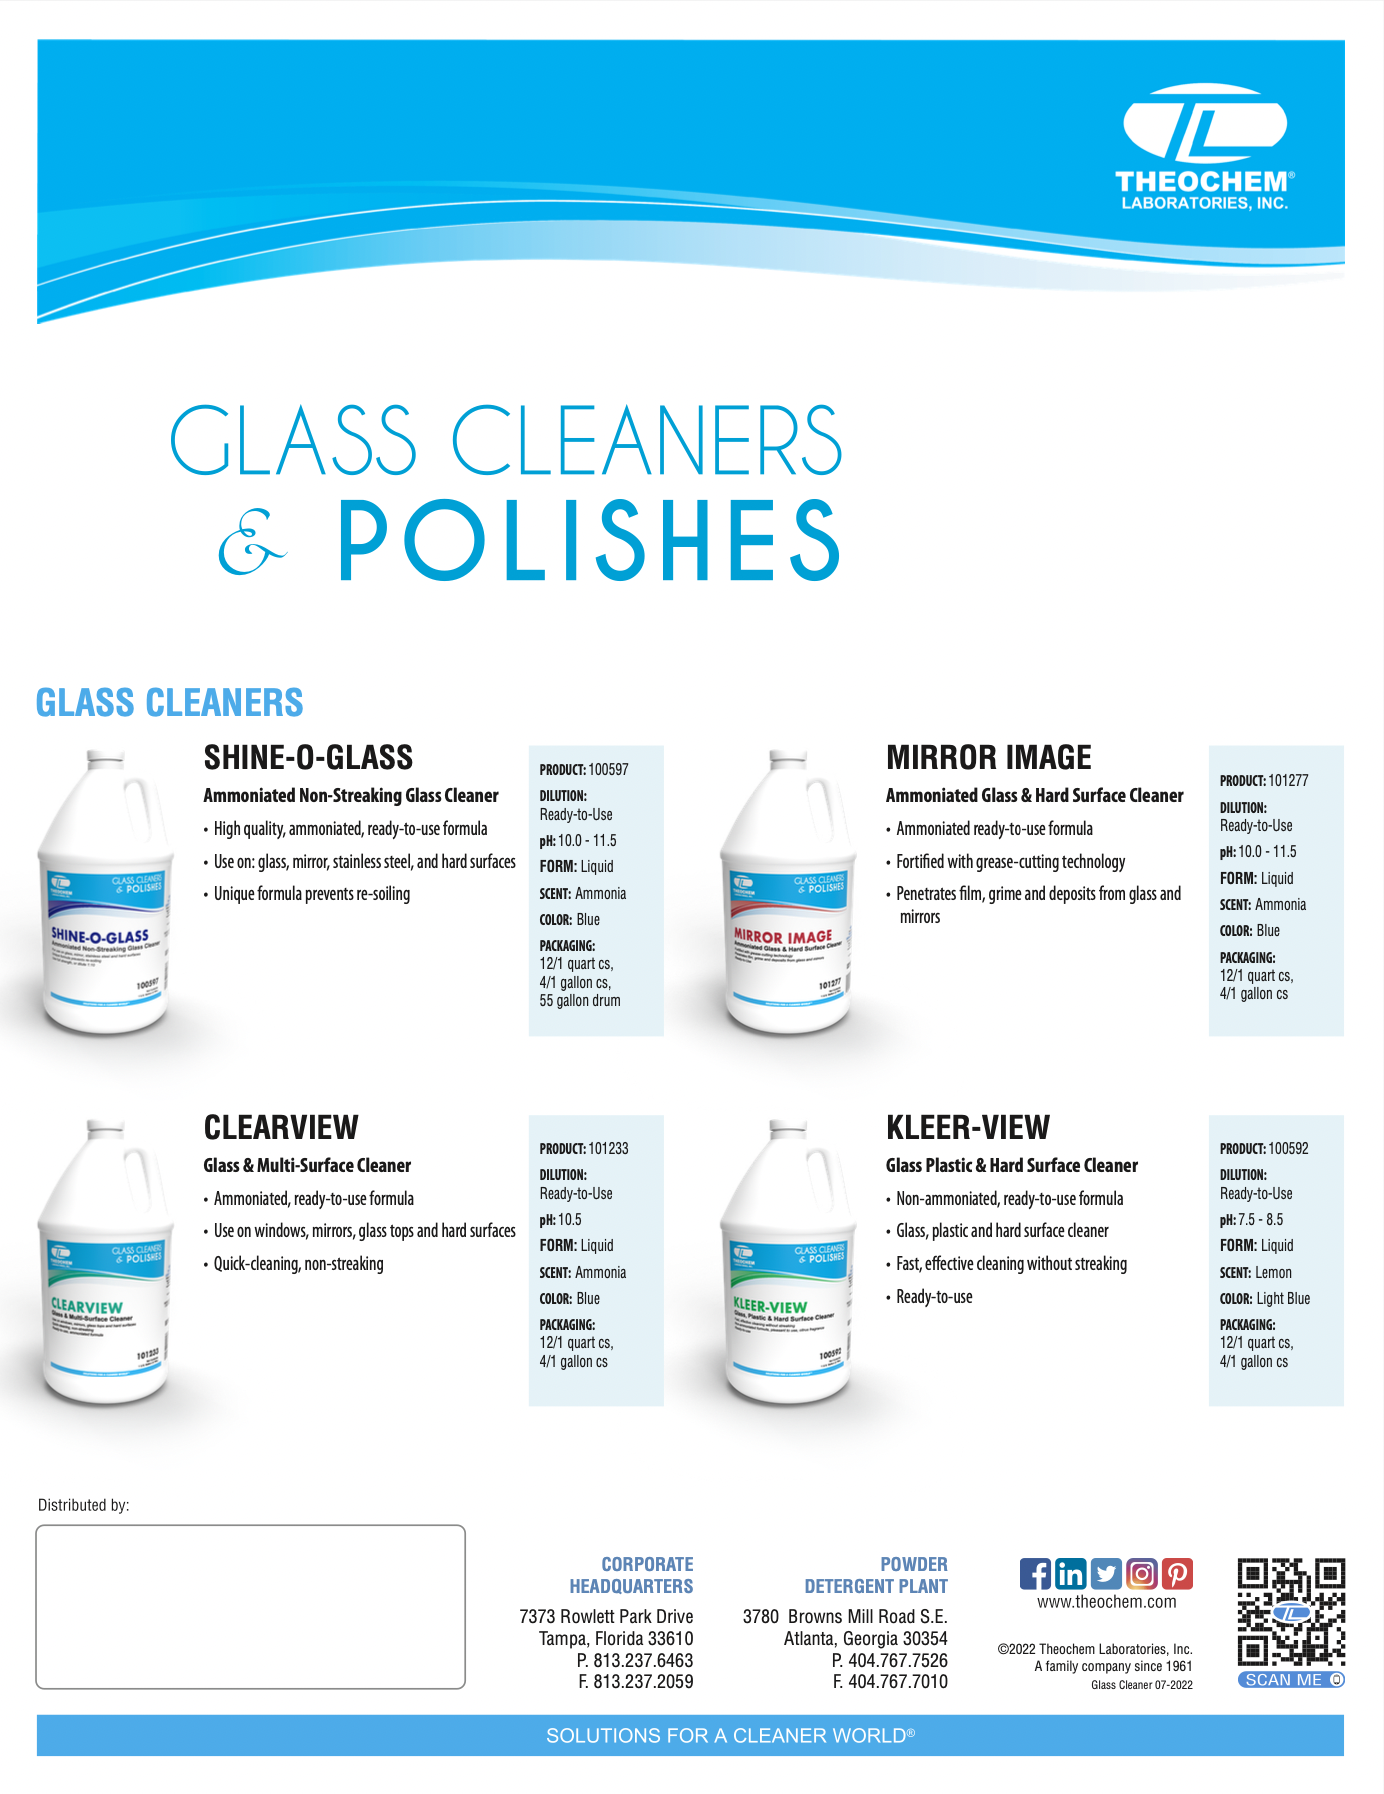 Glass Cleaners & Polishes